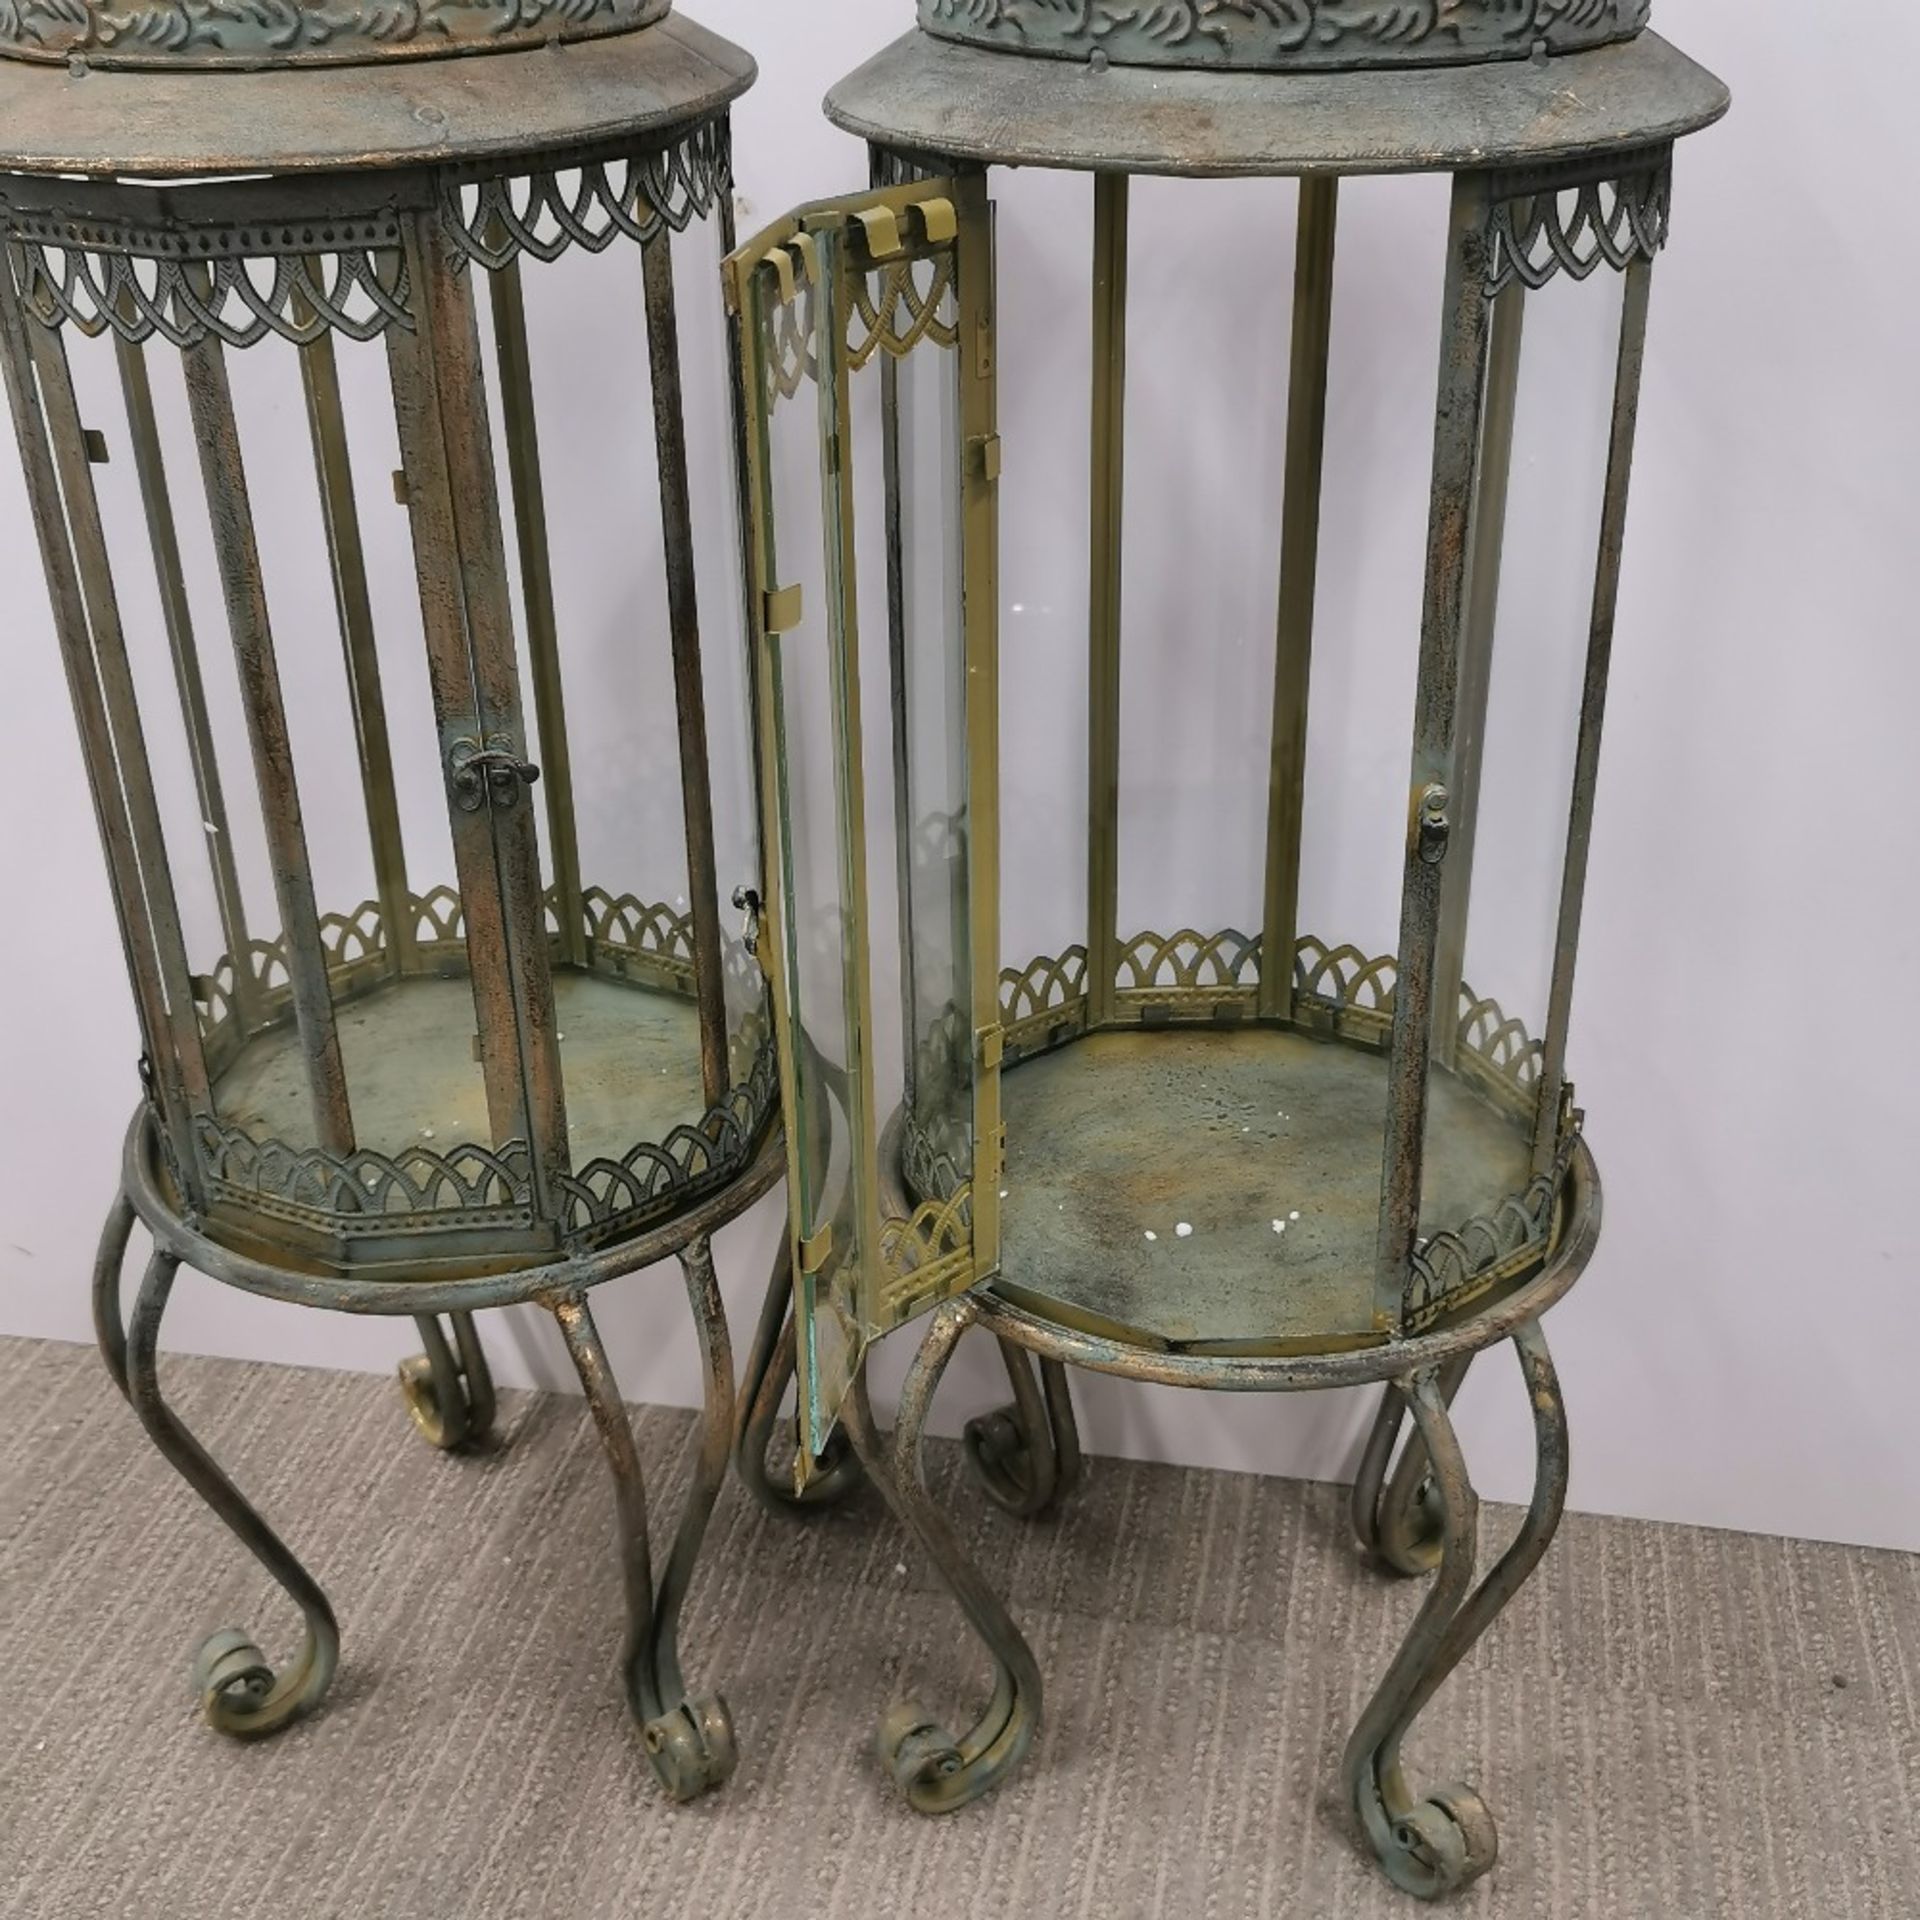 A pair of metal and glass garden storm lanterns, H. 80cm. - Image 3 of 3